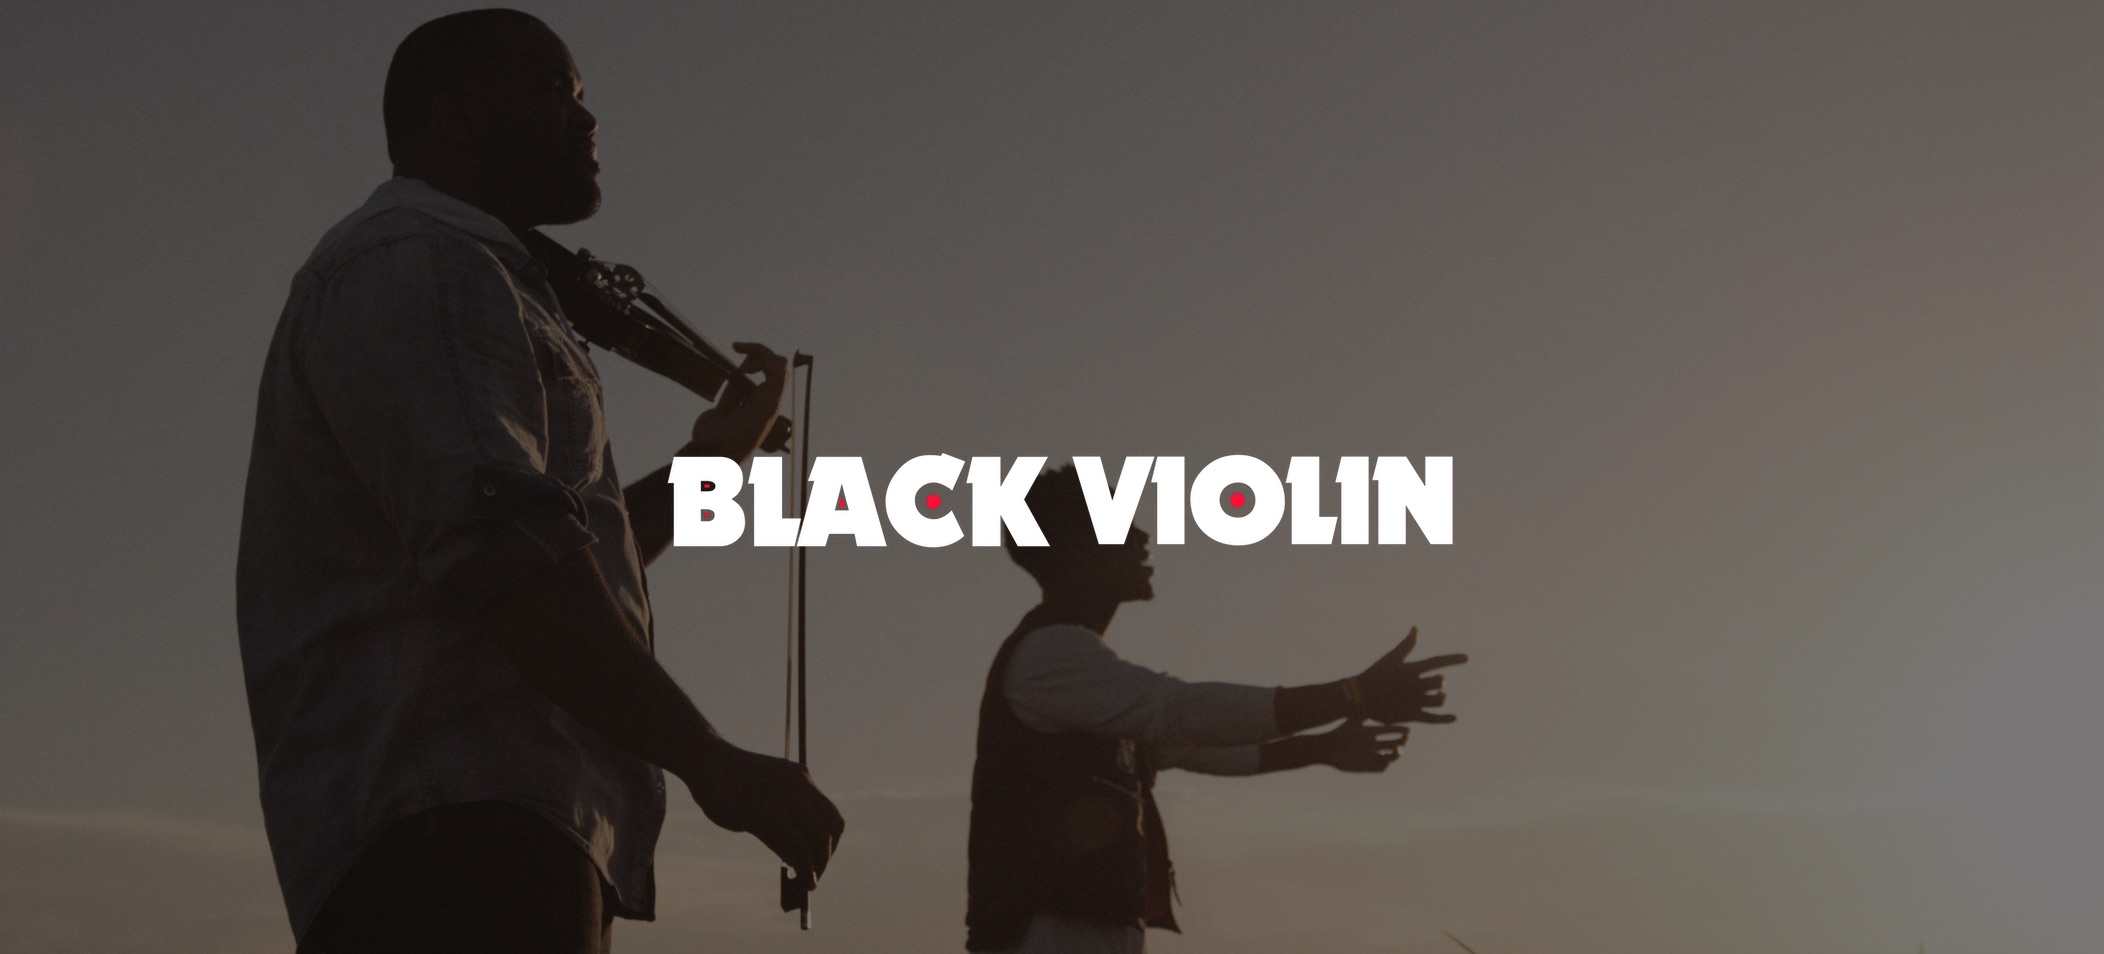 Red and white Black Violin logo on background closeup side profile of man playing violin with another man singing next to him